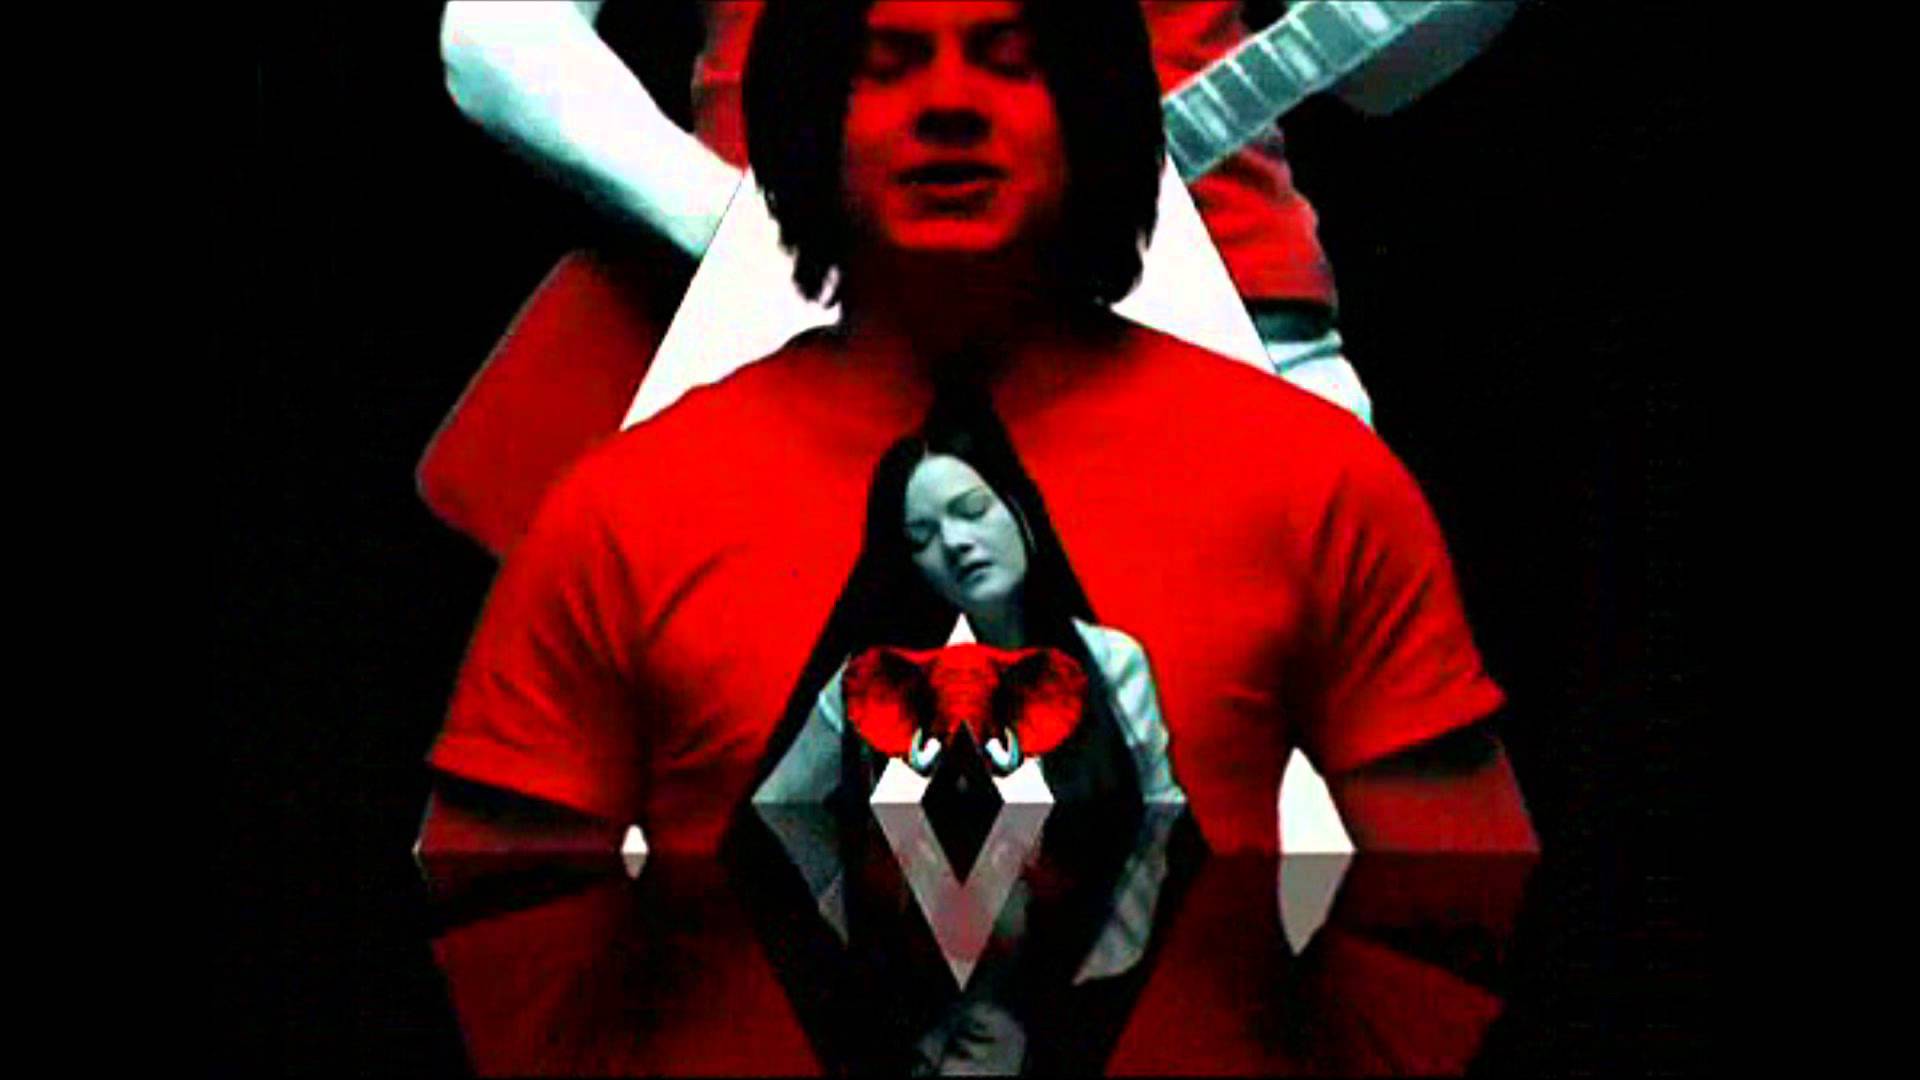 vyvienne long seven nation army mp3 torrent